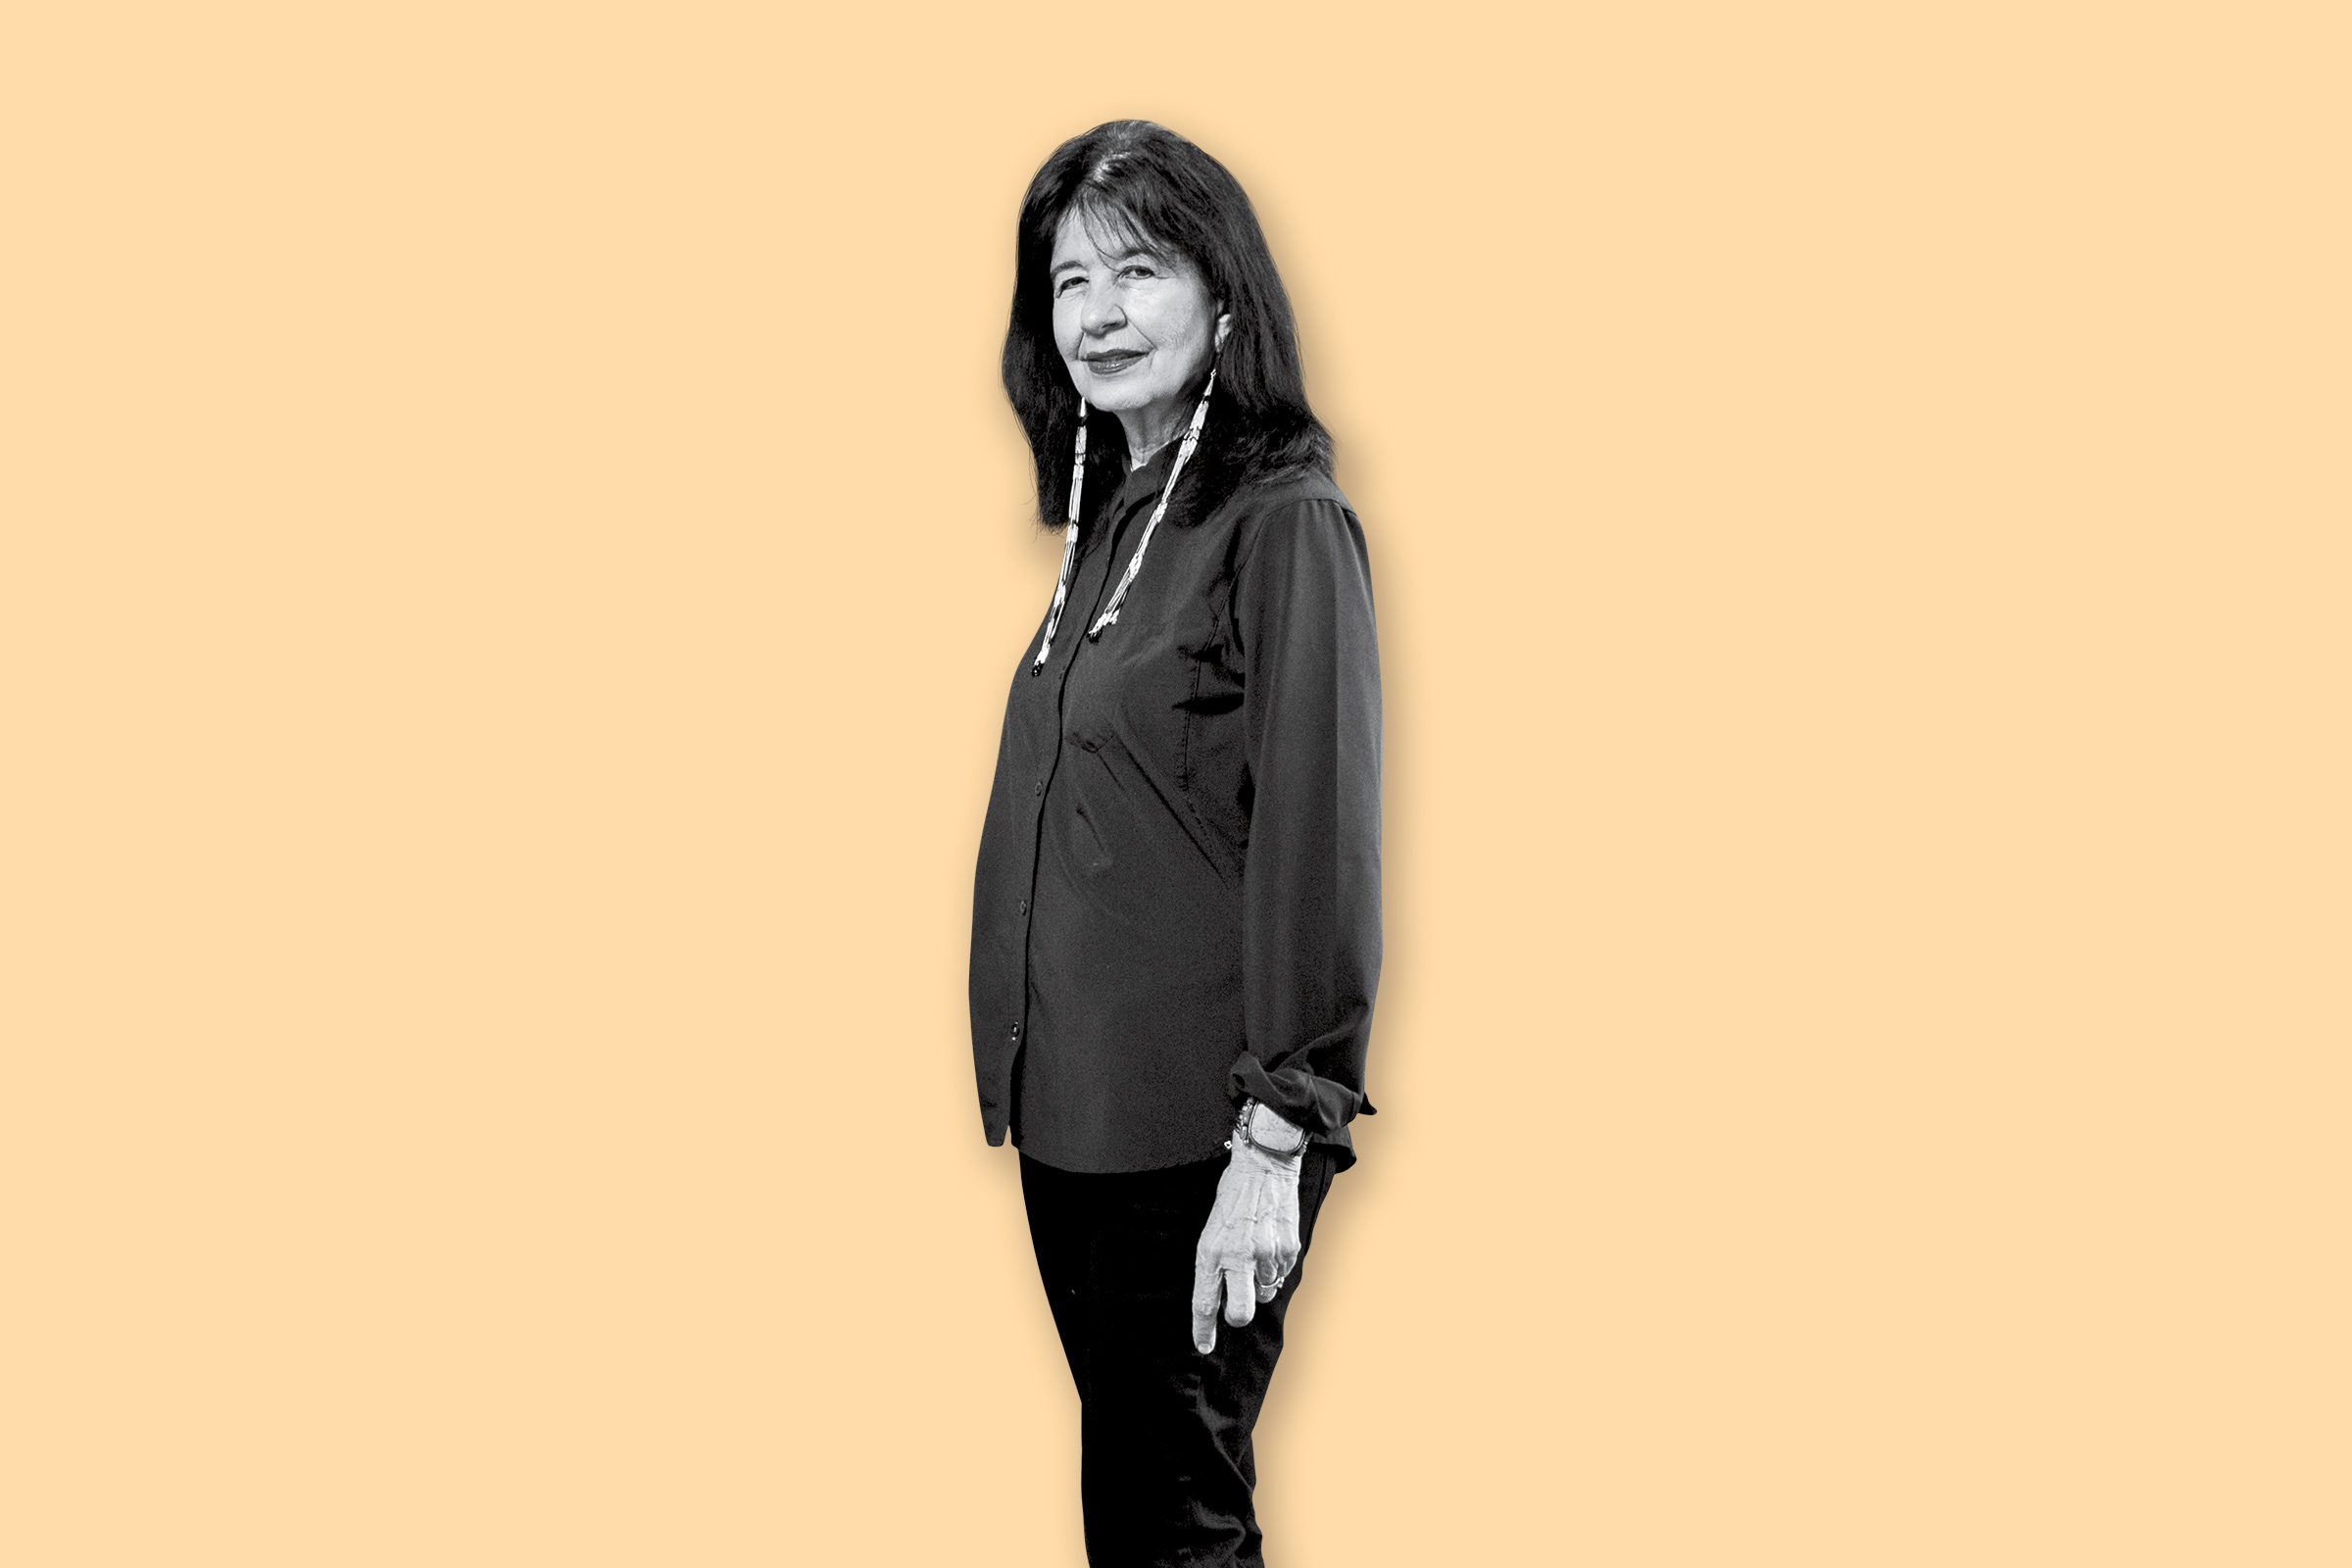 “We need something to counter the hate speech, the divisiveness, and it’s possible with poetry,” says Joy Harjo, the first Native American U.S. poet laureate. (Shawn Miller—Library of Congress)